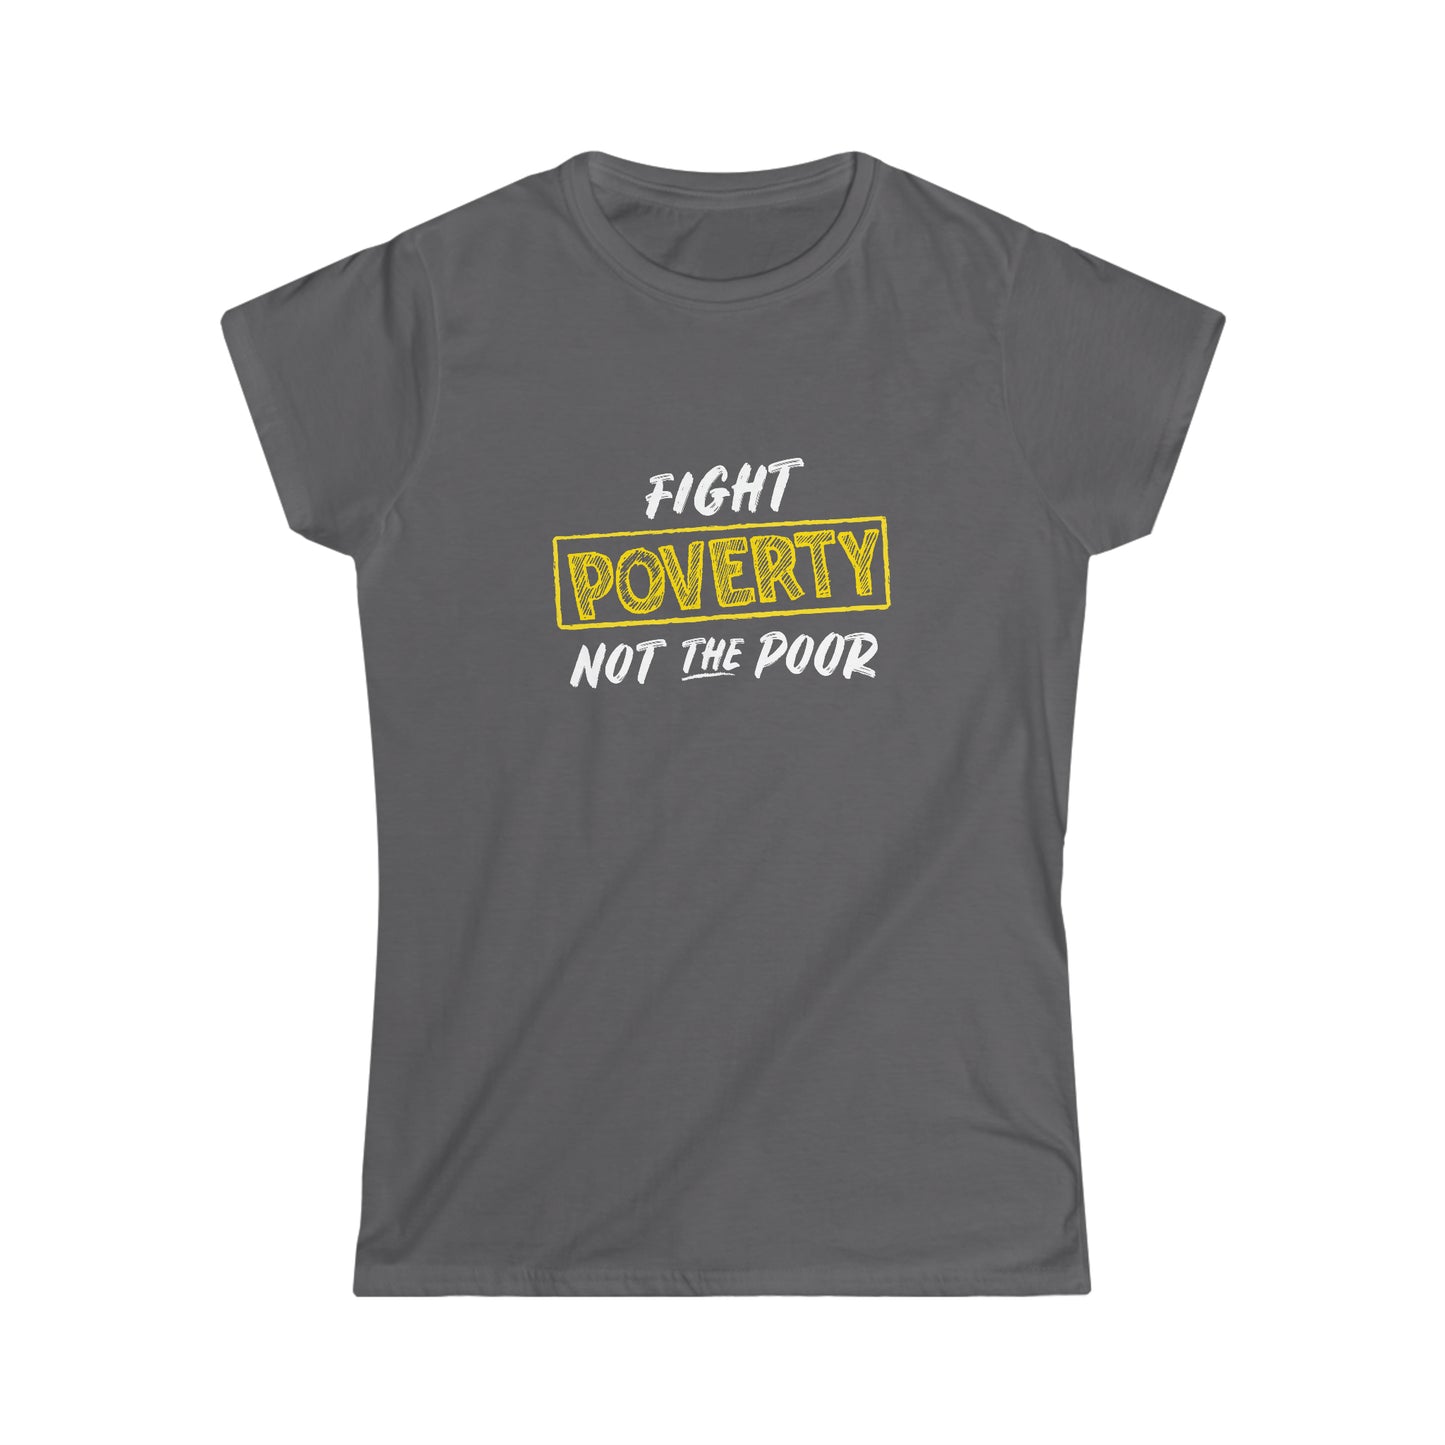 “Fight Poverty Not The Poor” Women’s T-Shirts